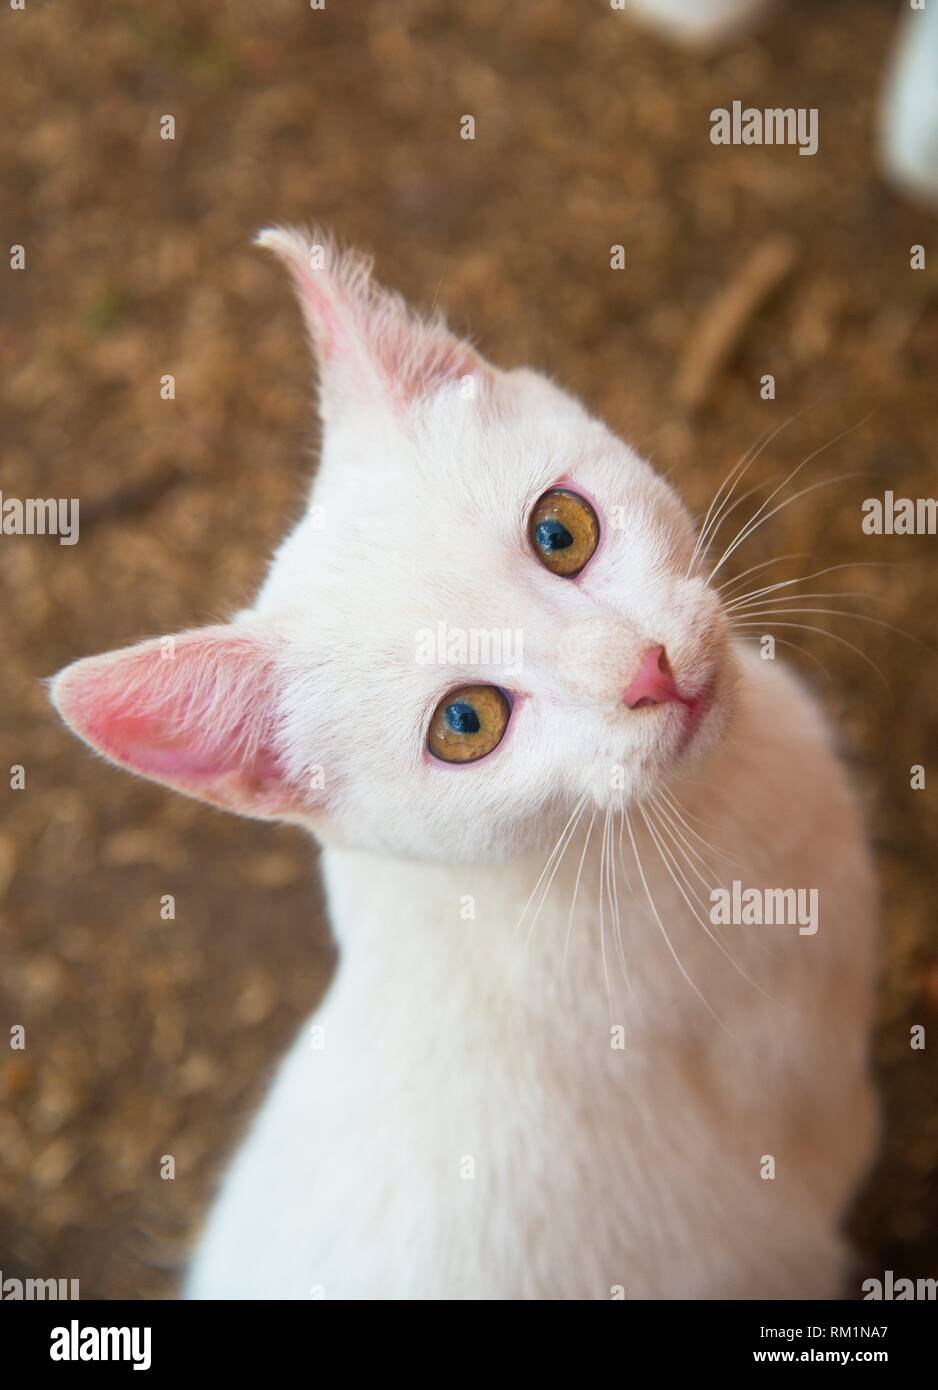 Lovely white kitten looking at the camera. Stock Photo